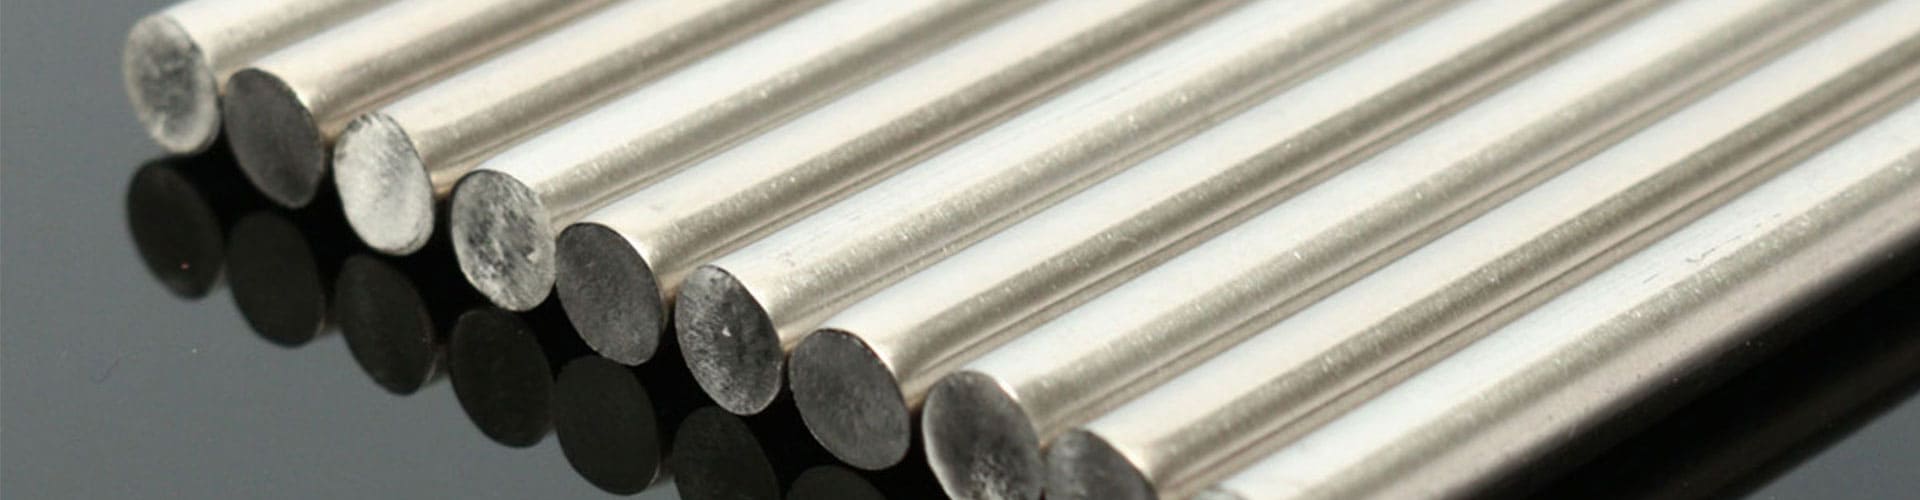 nickel-alloy-201-round-bars-rods-manufacturer-exporter-supplier-in-canada